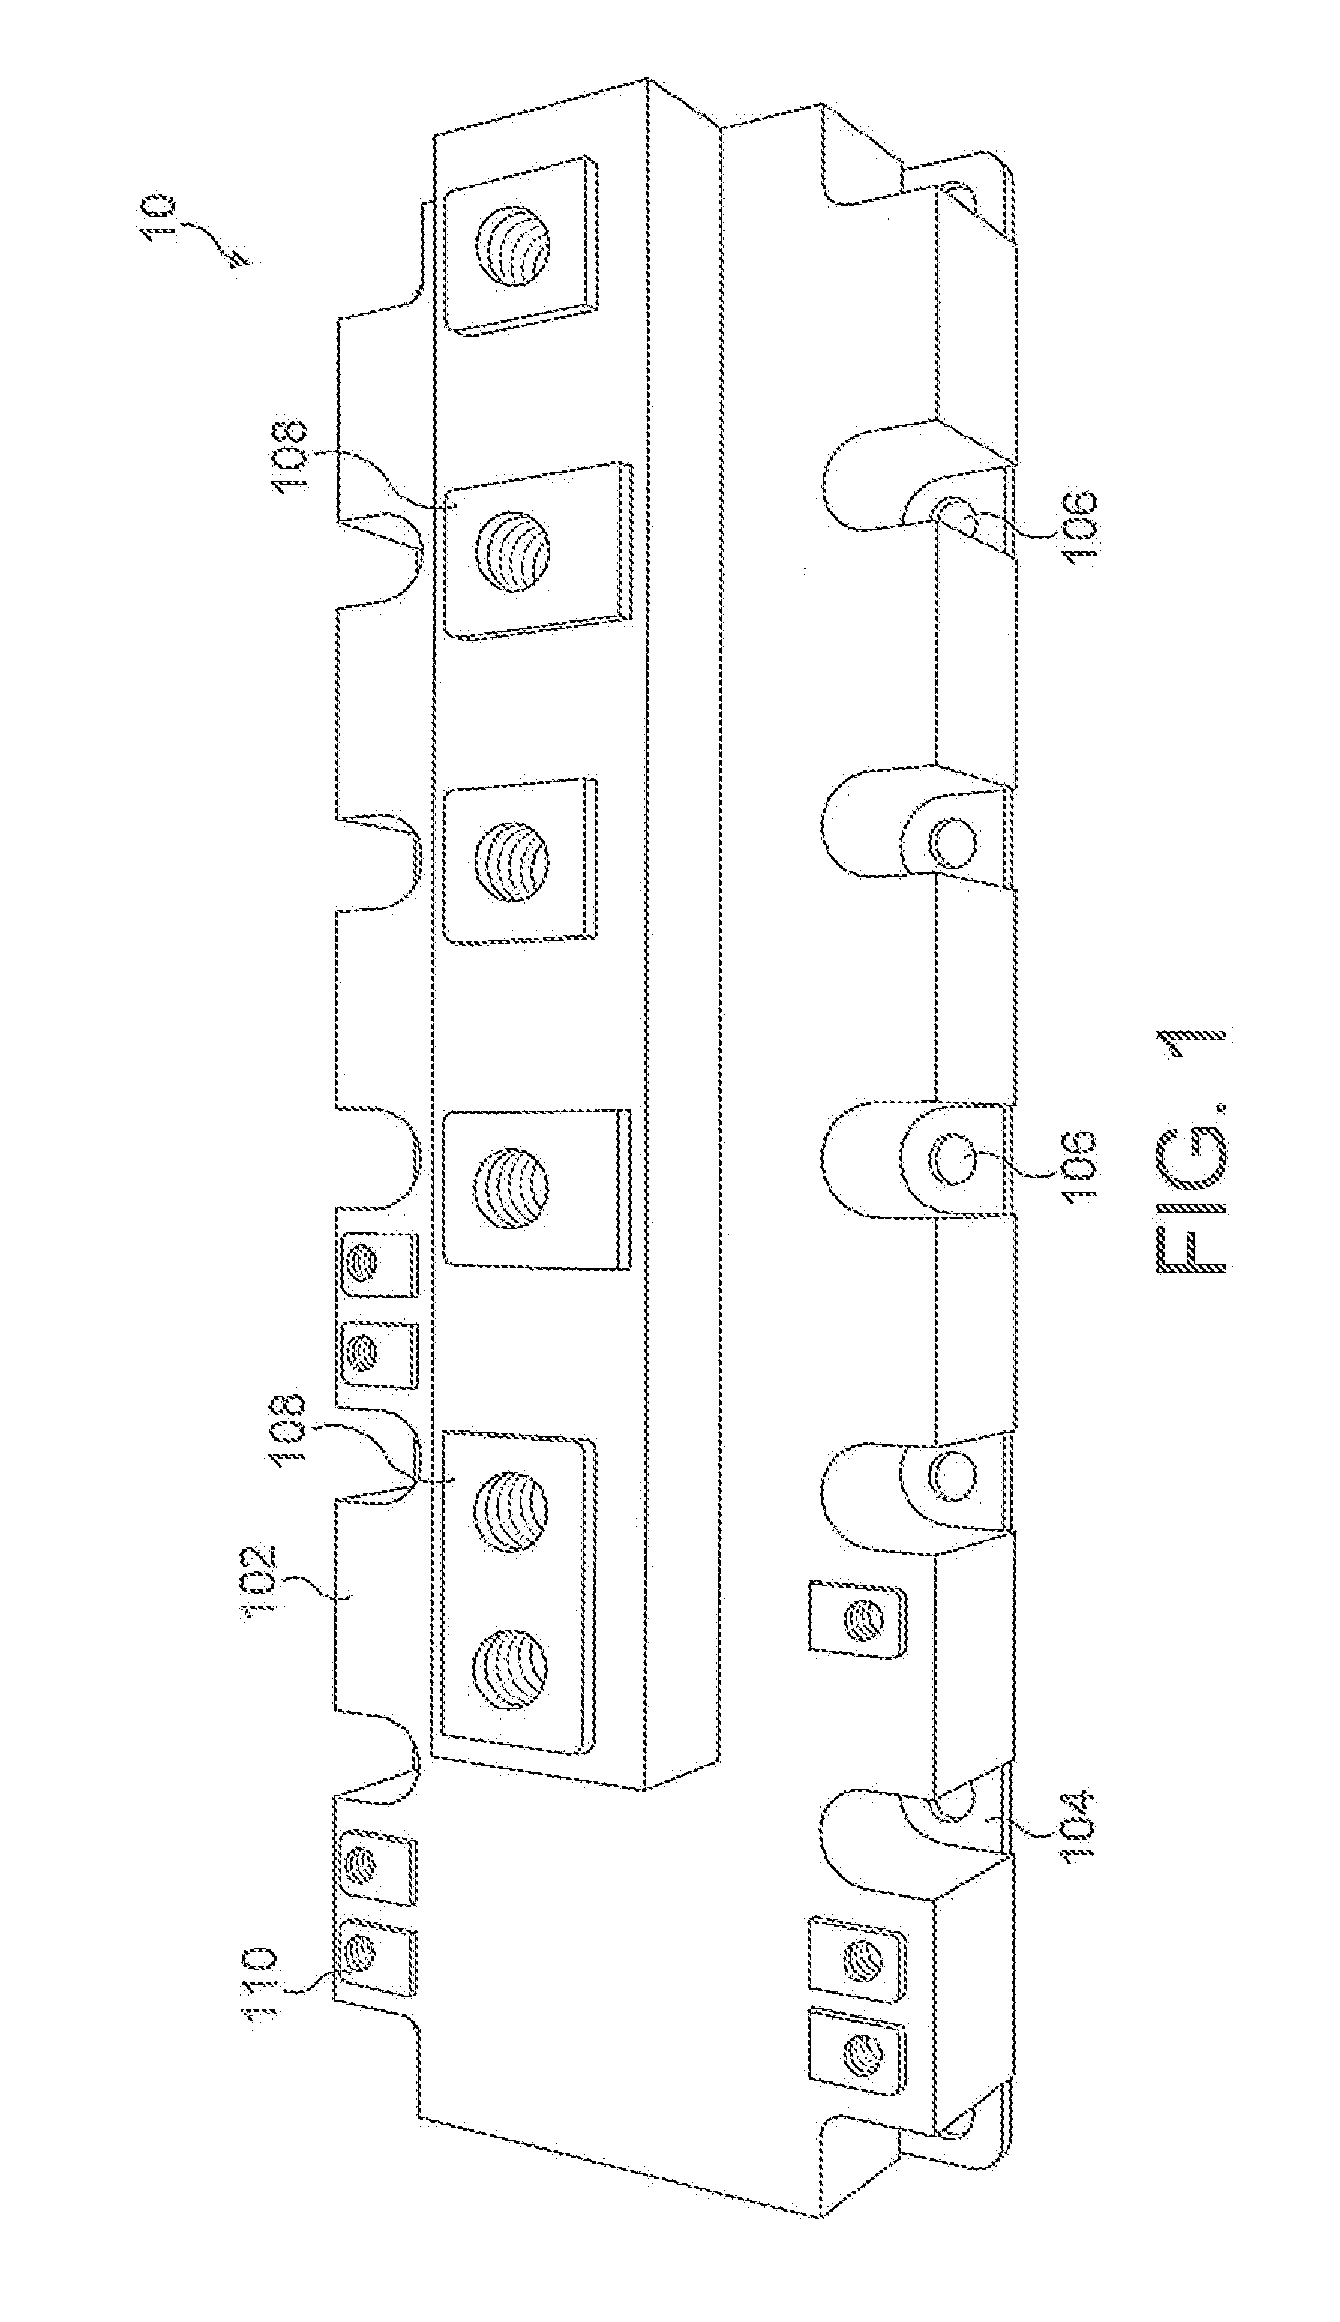 Optical sensor system and detecting method for an enclosed semiconductor device module